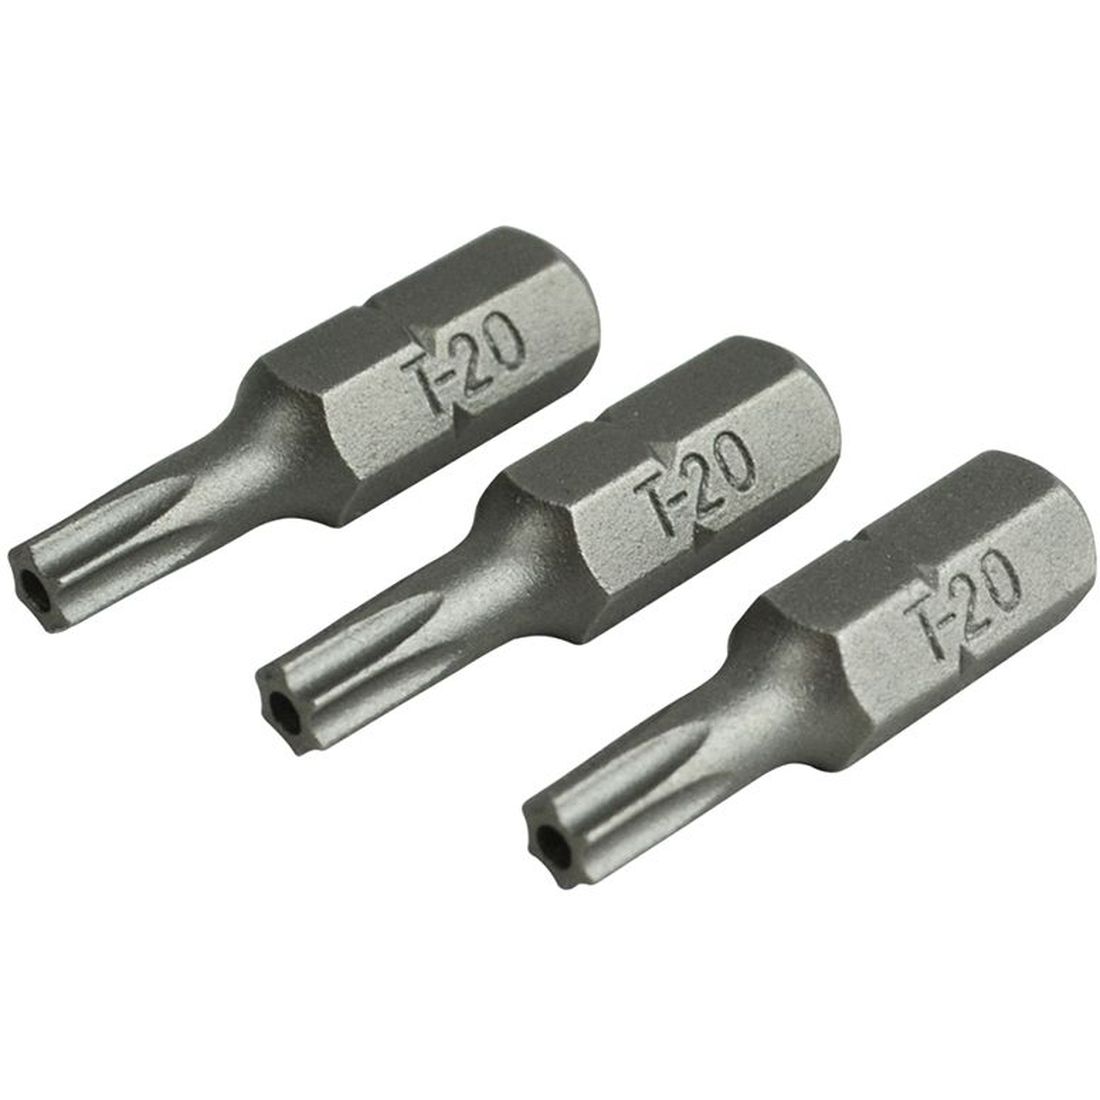 Faithfull Security S2 Grade Steel Screwdriver Bits T20S x 25mm (Pack 3)                   